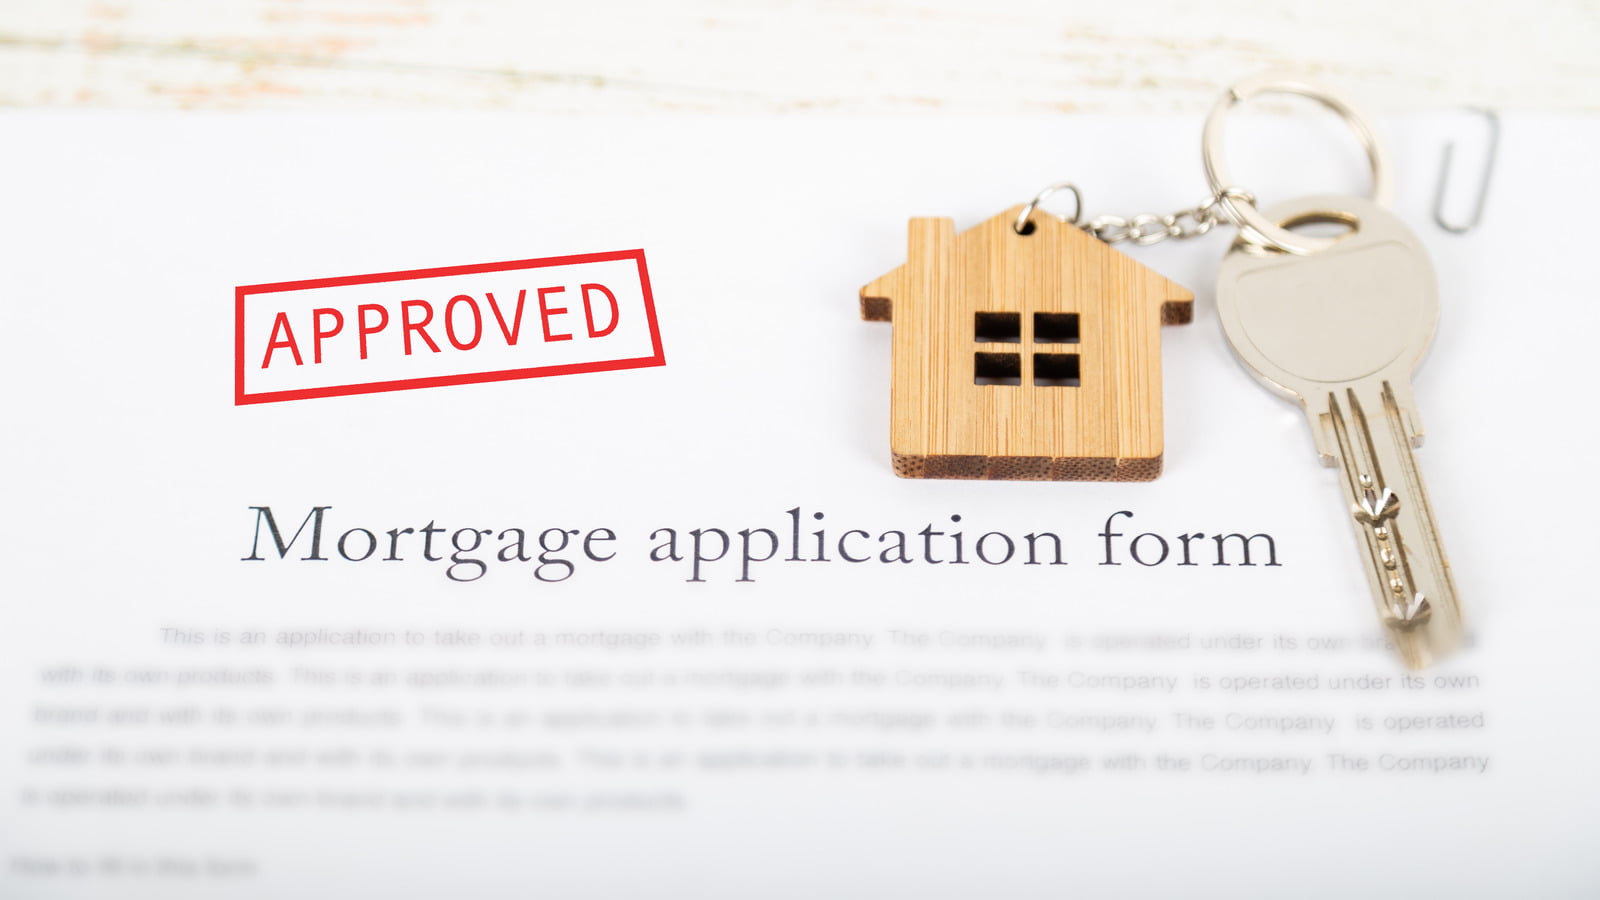 Mortgage application and registration fees